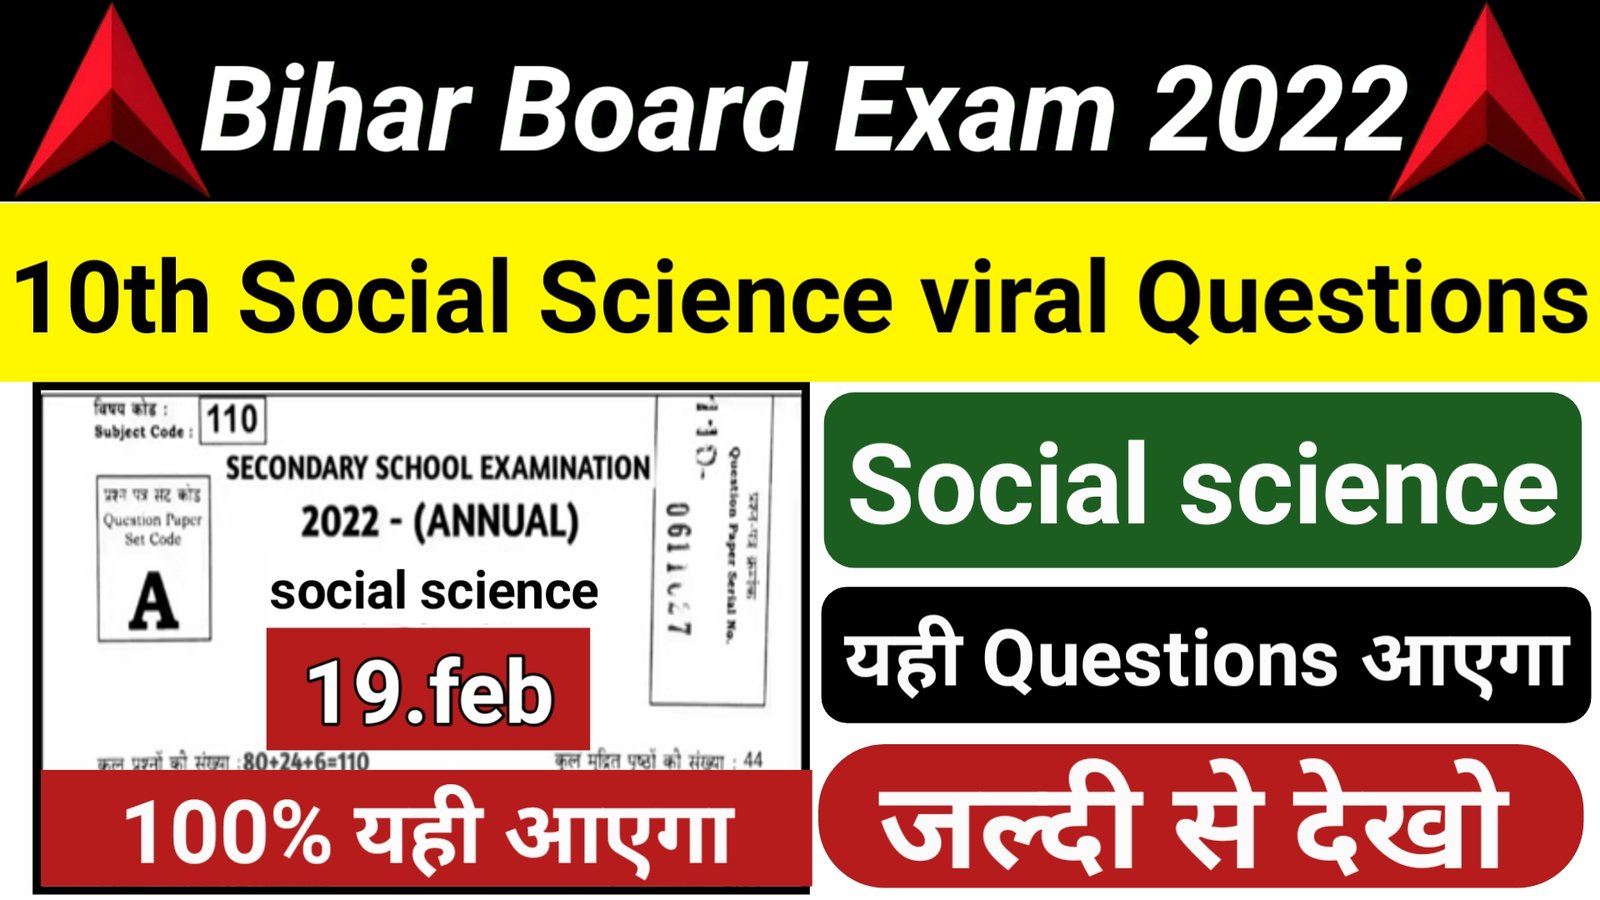 10th Social Science viral question exam 2022